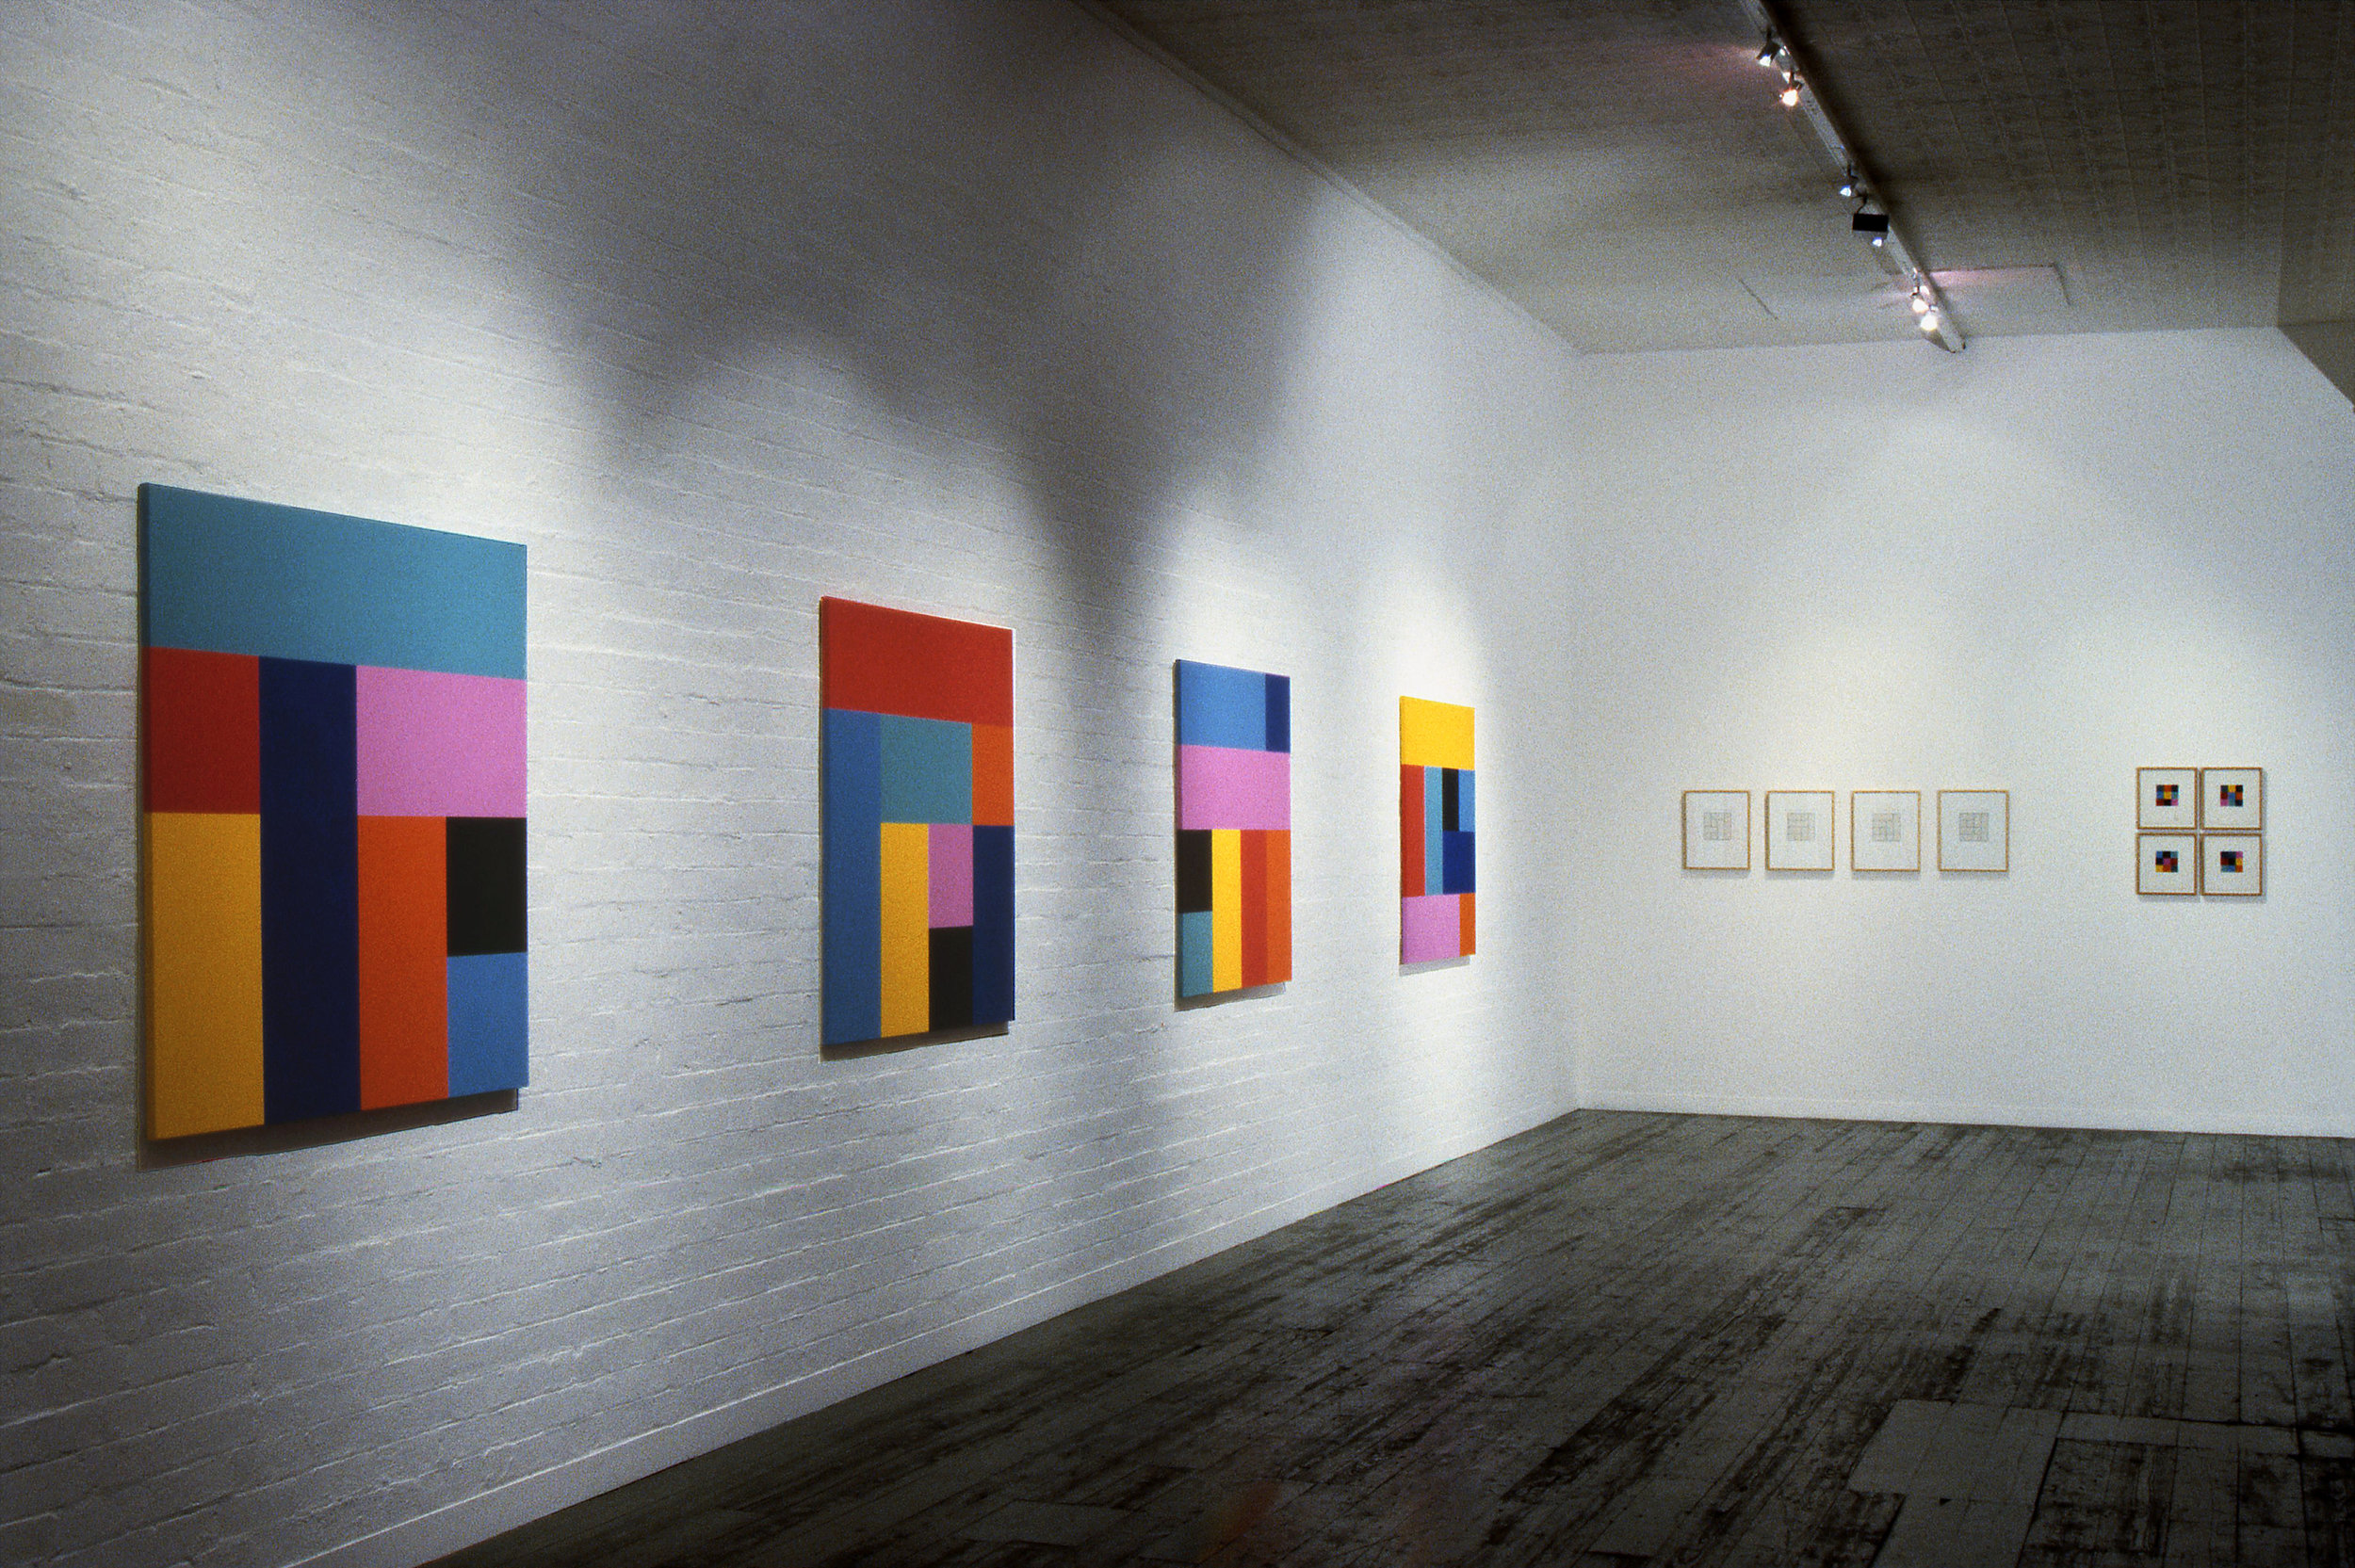  Sunrise, 1993, Installation View,  Origami  series, Synthetic polymer paint on canvas, 122 x 122cm each, City Gallery, Melbourne.&nbsp; 